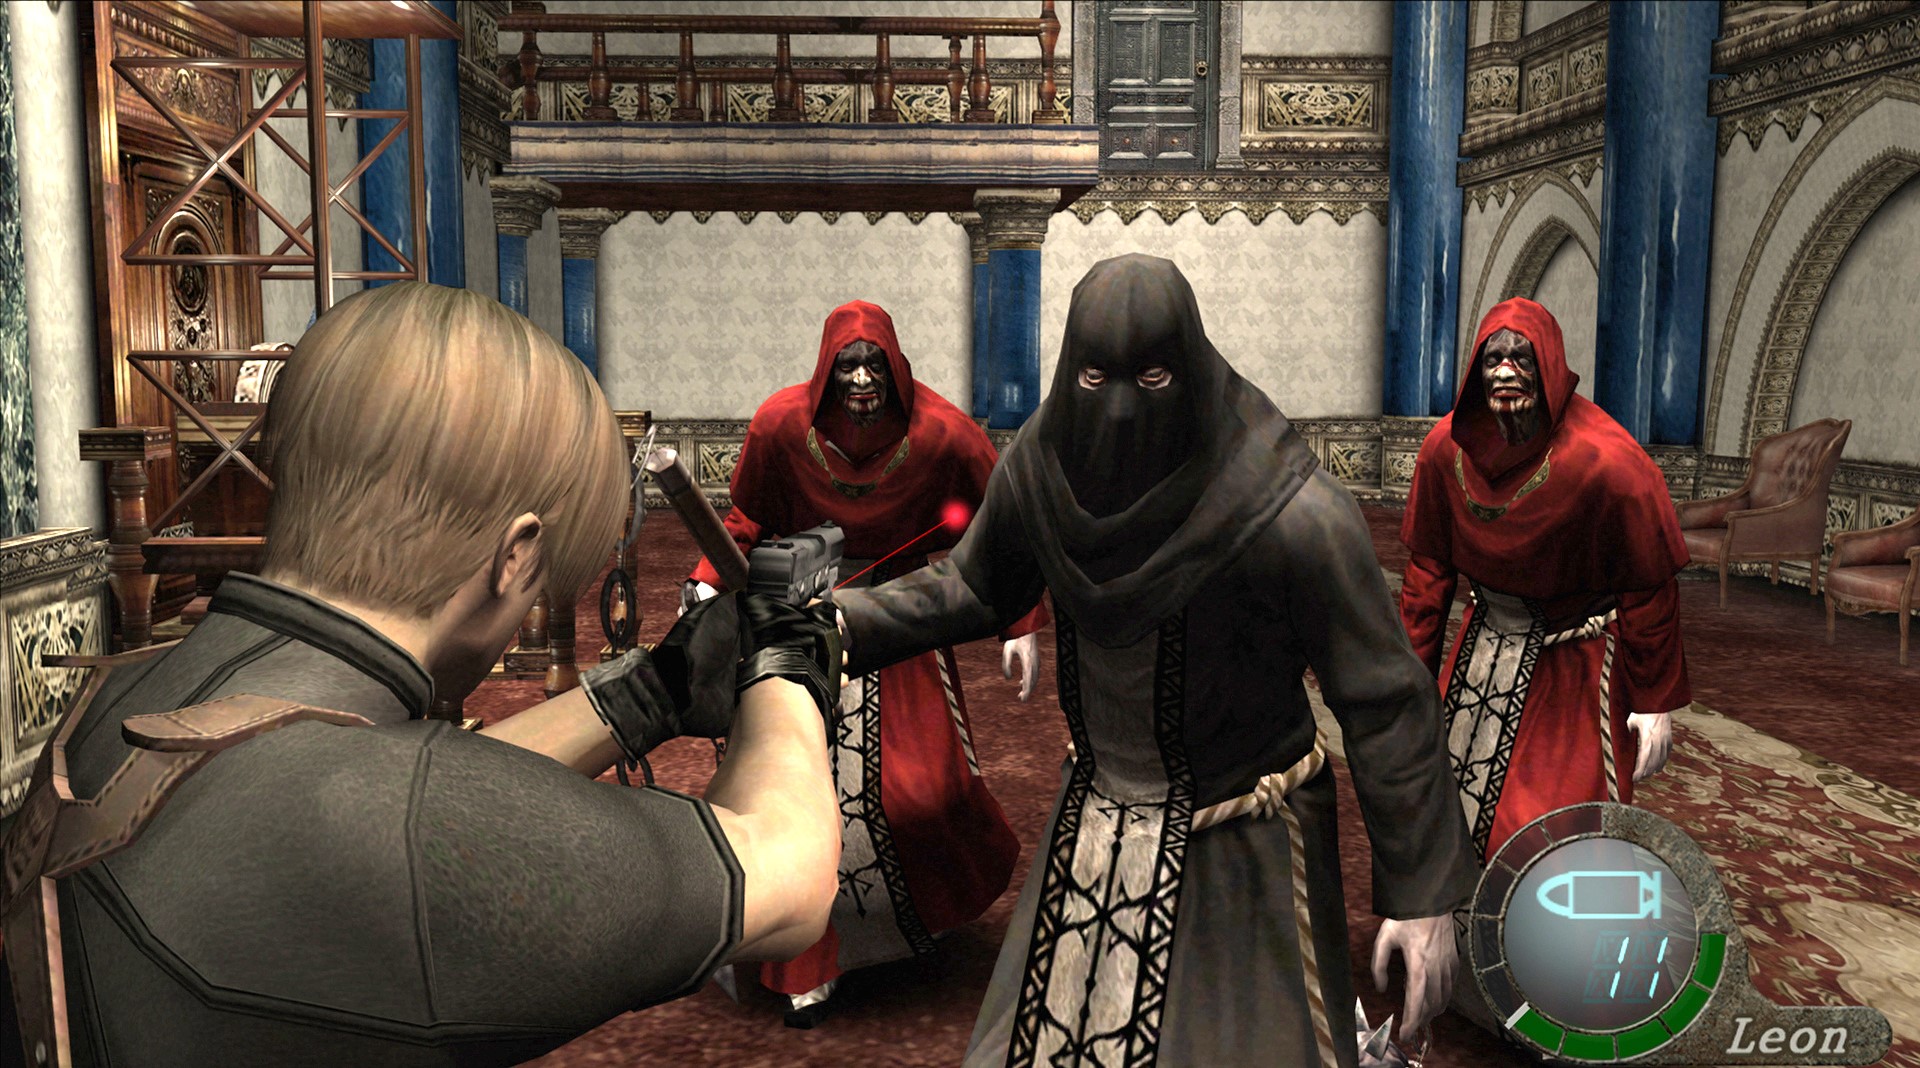 Steam resident evil 4 ultimate hd фото 22